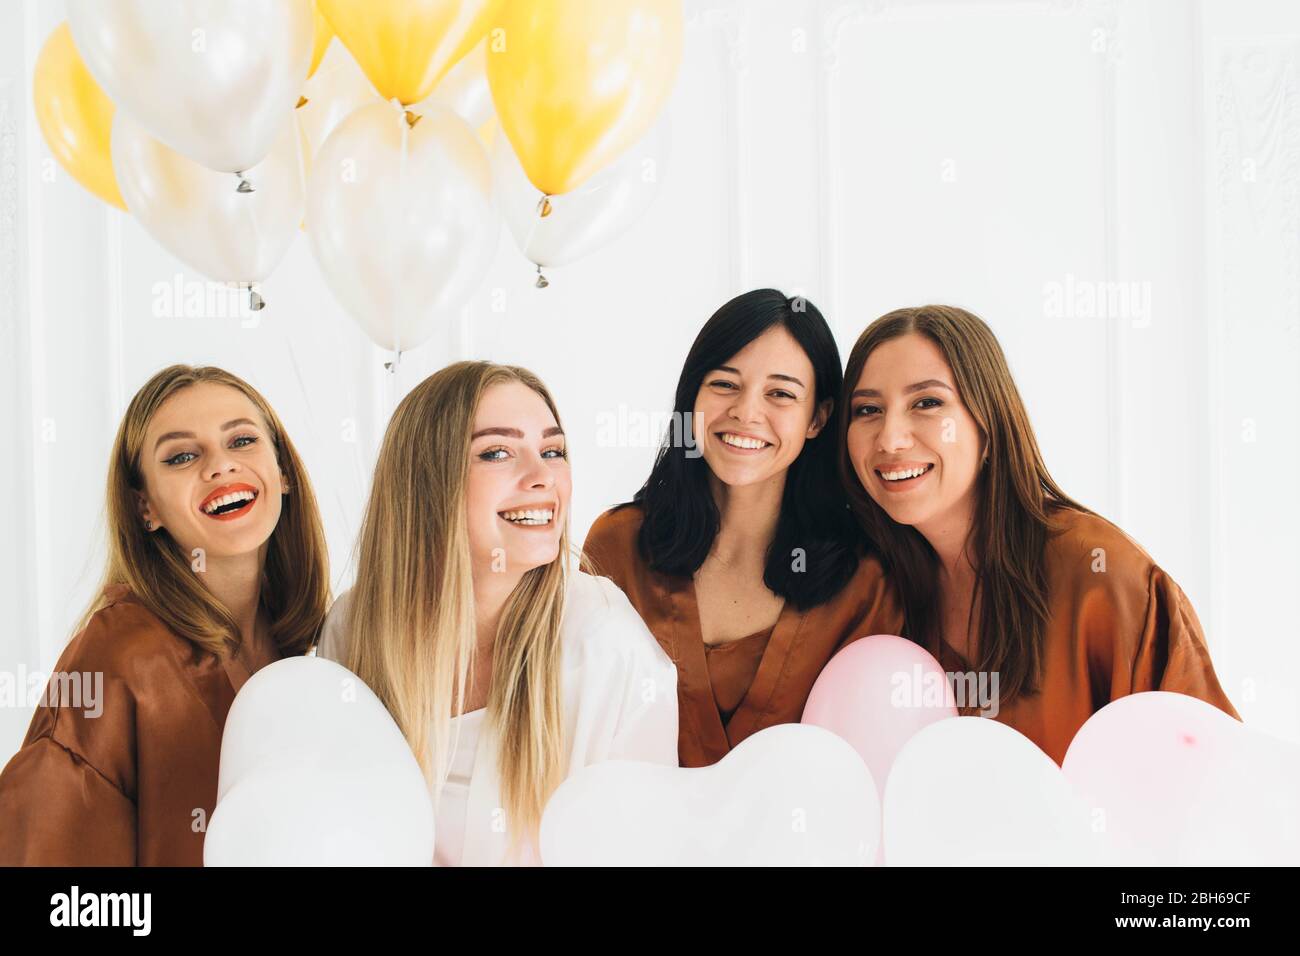 Beautiful woman wearing satin robes celebrating bachelorette, holding balloons. Woman with her friends have a cool party Stock Photo